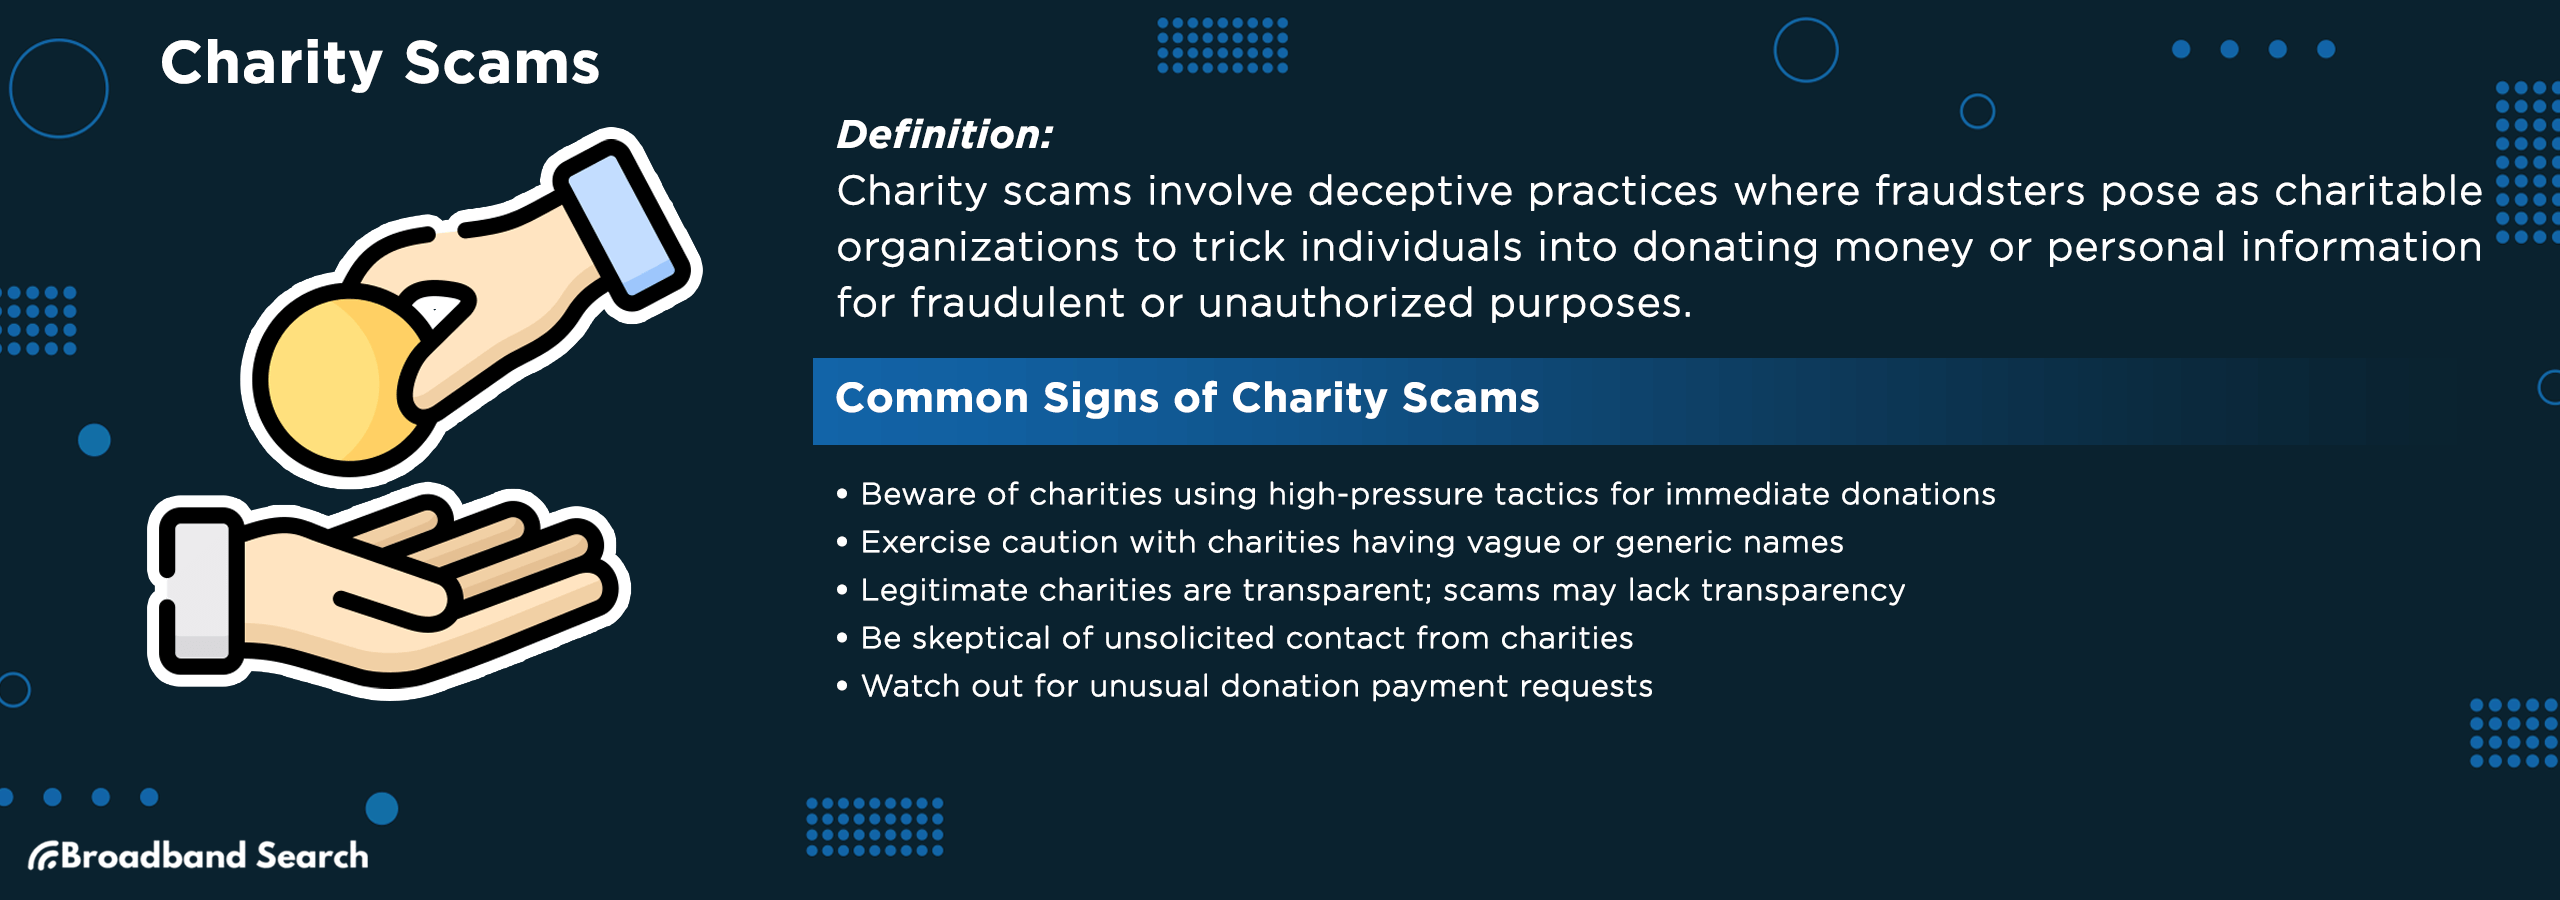 Definition and signs of Charity scams